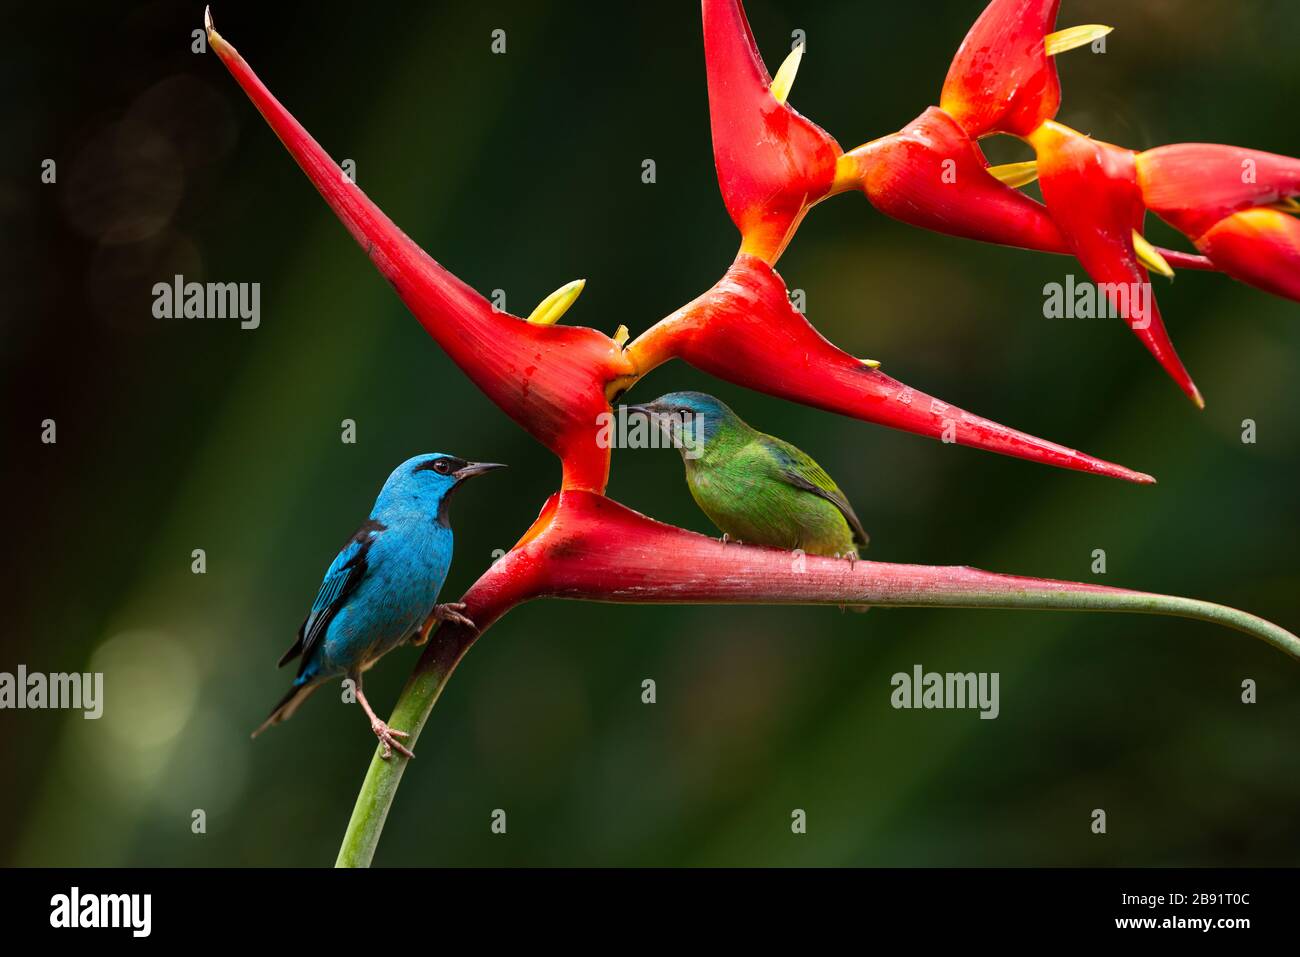 A pair of Blue Dacnis (Dacnis cayana) visiting a Heliconia flower in the Atlantic Rainforest Stock Photo